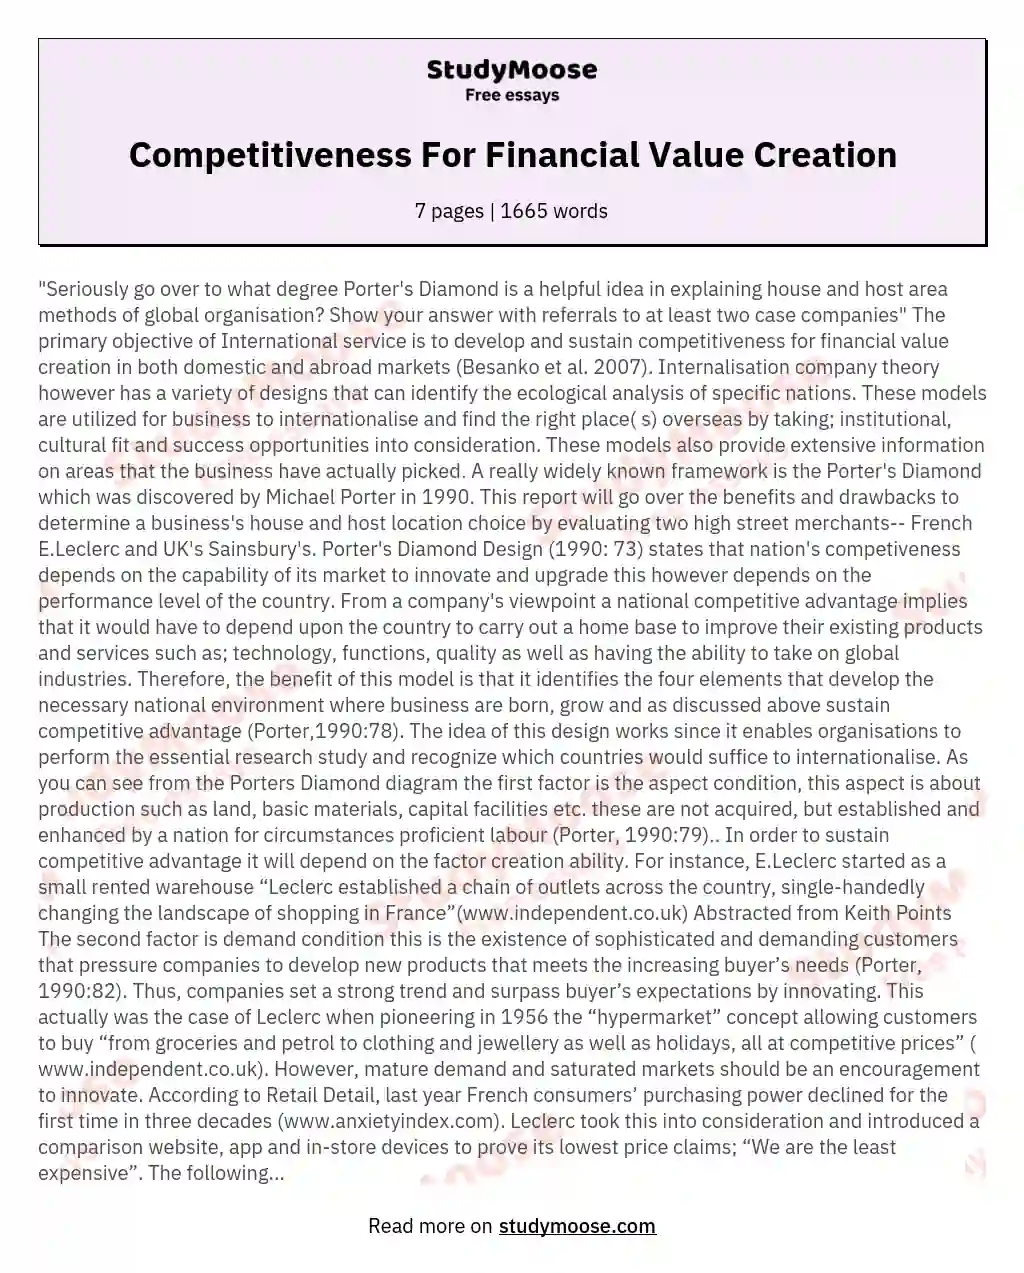 Competitiveness For Financial Value Creation essay